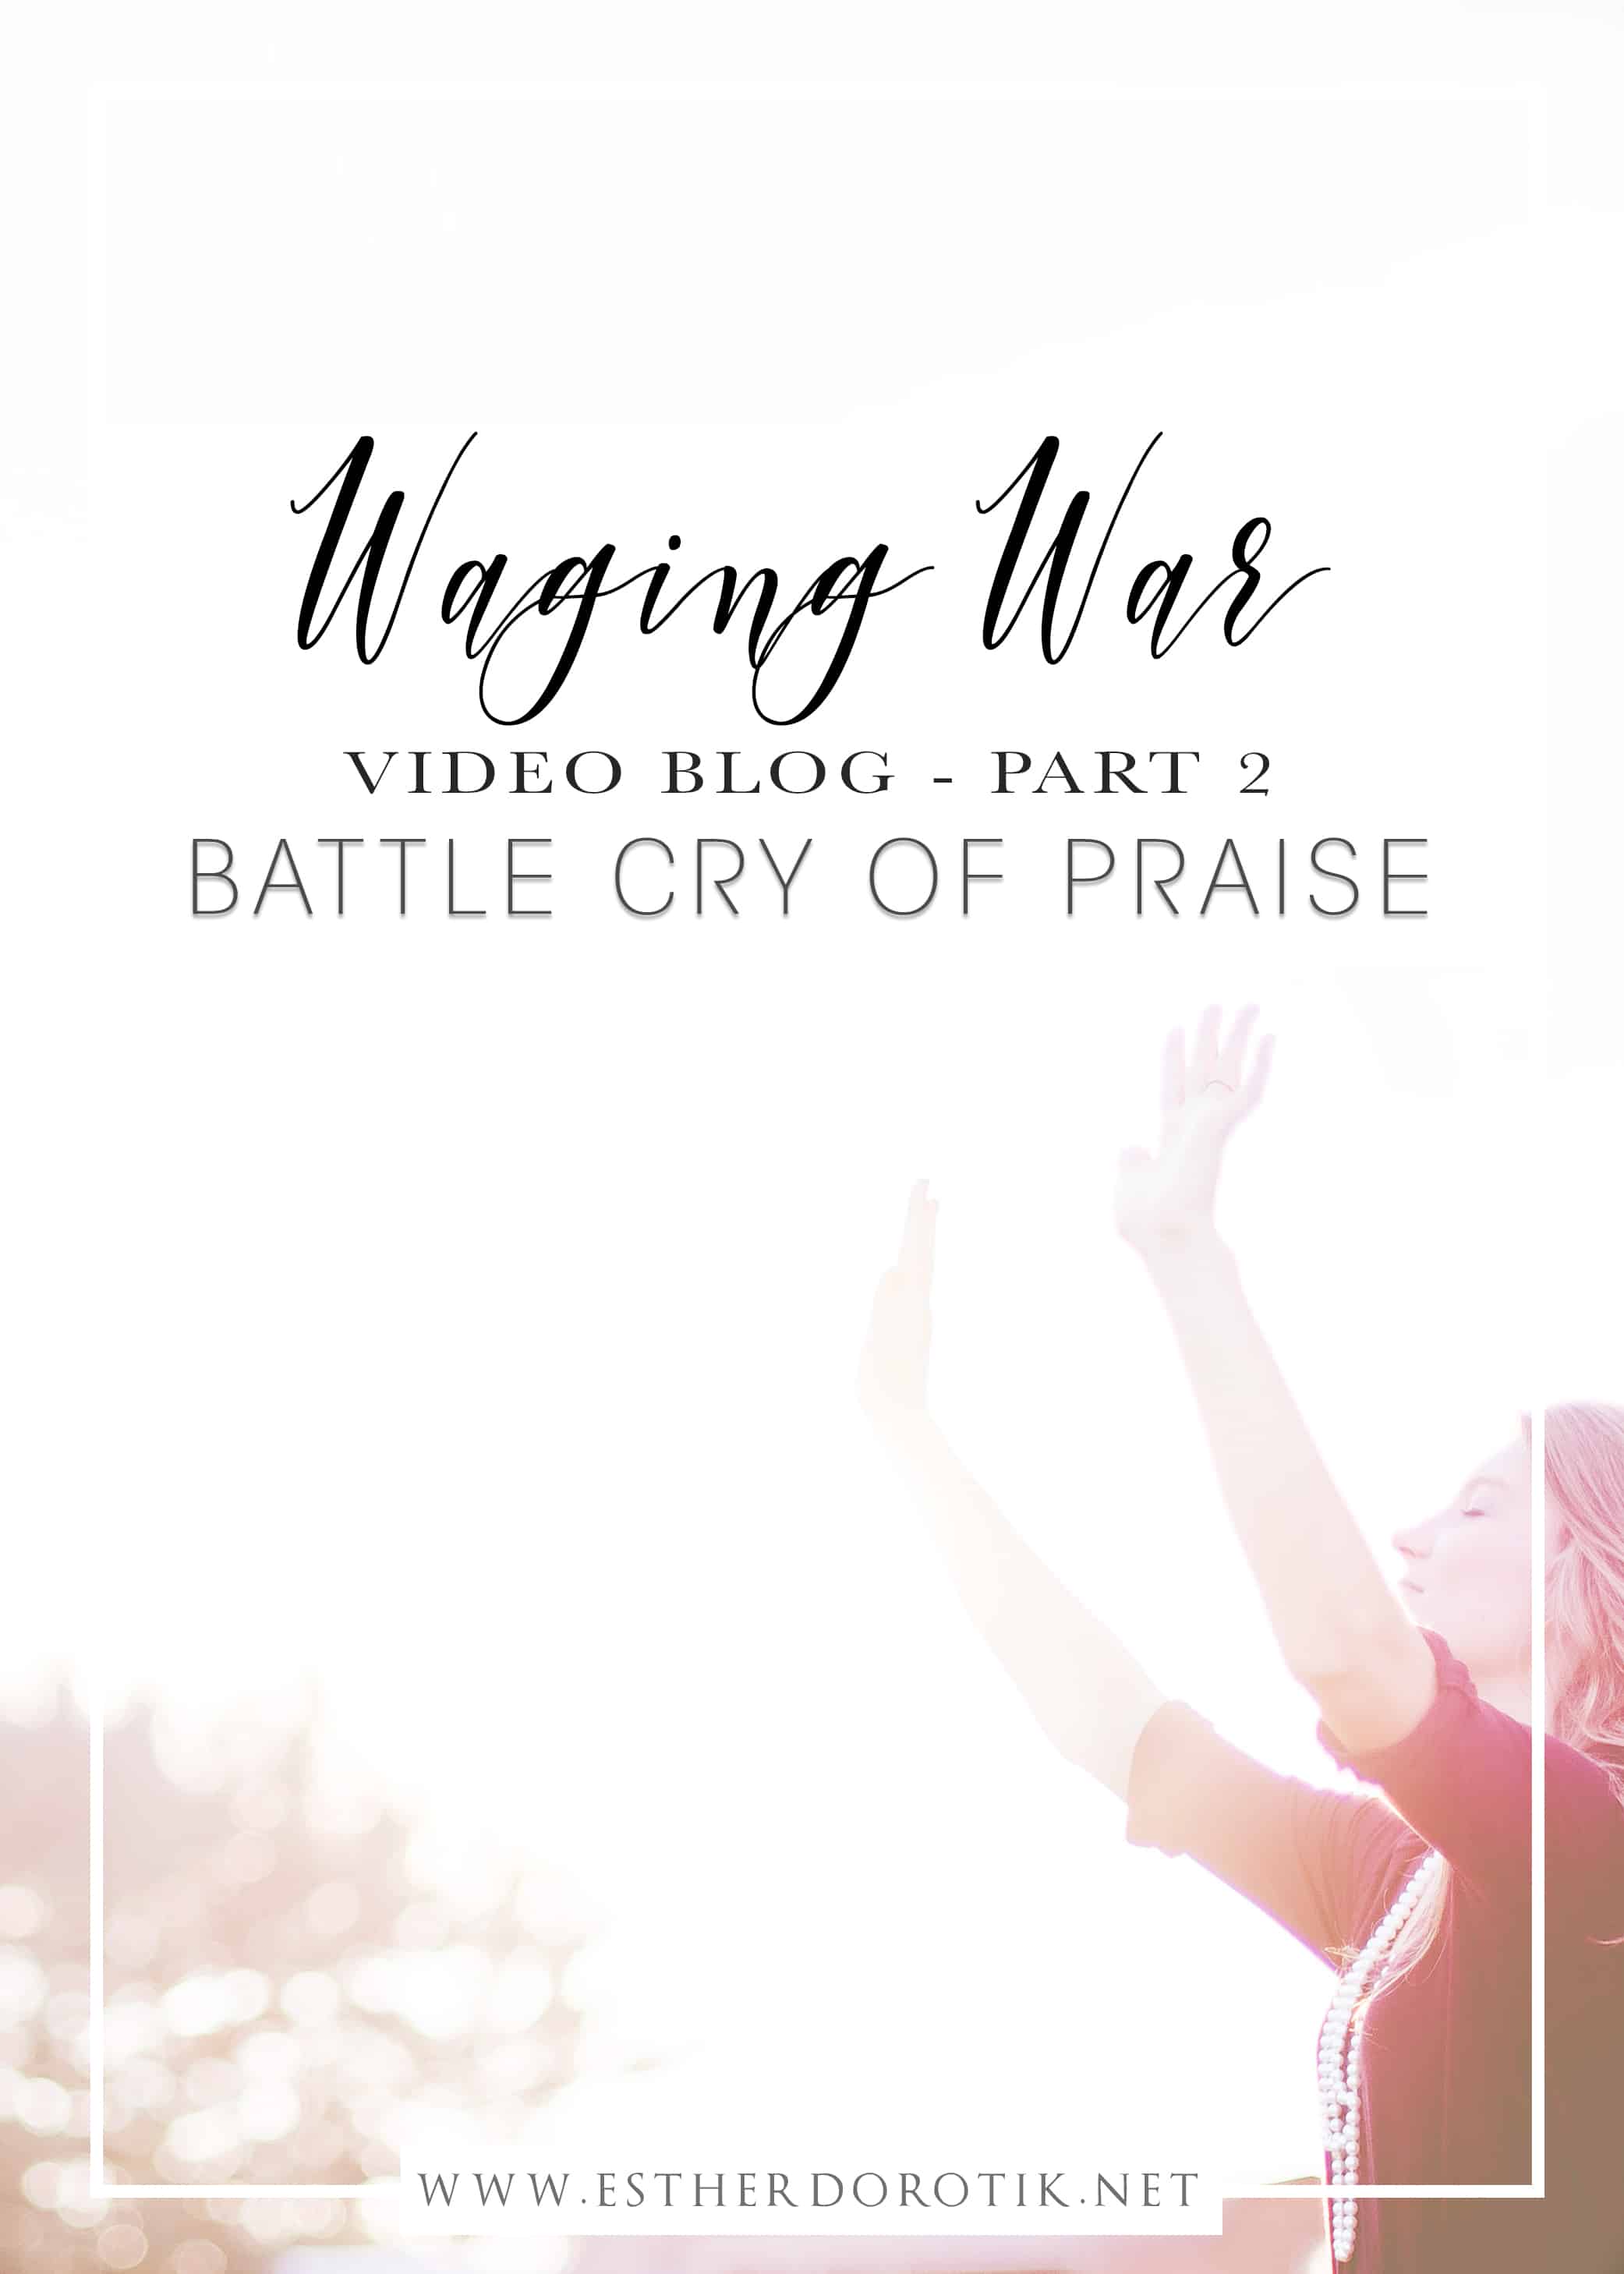 praising God in the storm, battle cry of praise, standing firm against the enemy, weapons of spiritual warfare, unleashing God's power, Christian devotional, facing trials, bible studies, singing to God, what praise does, scripture on praise